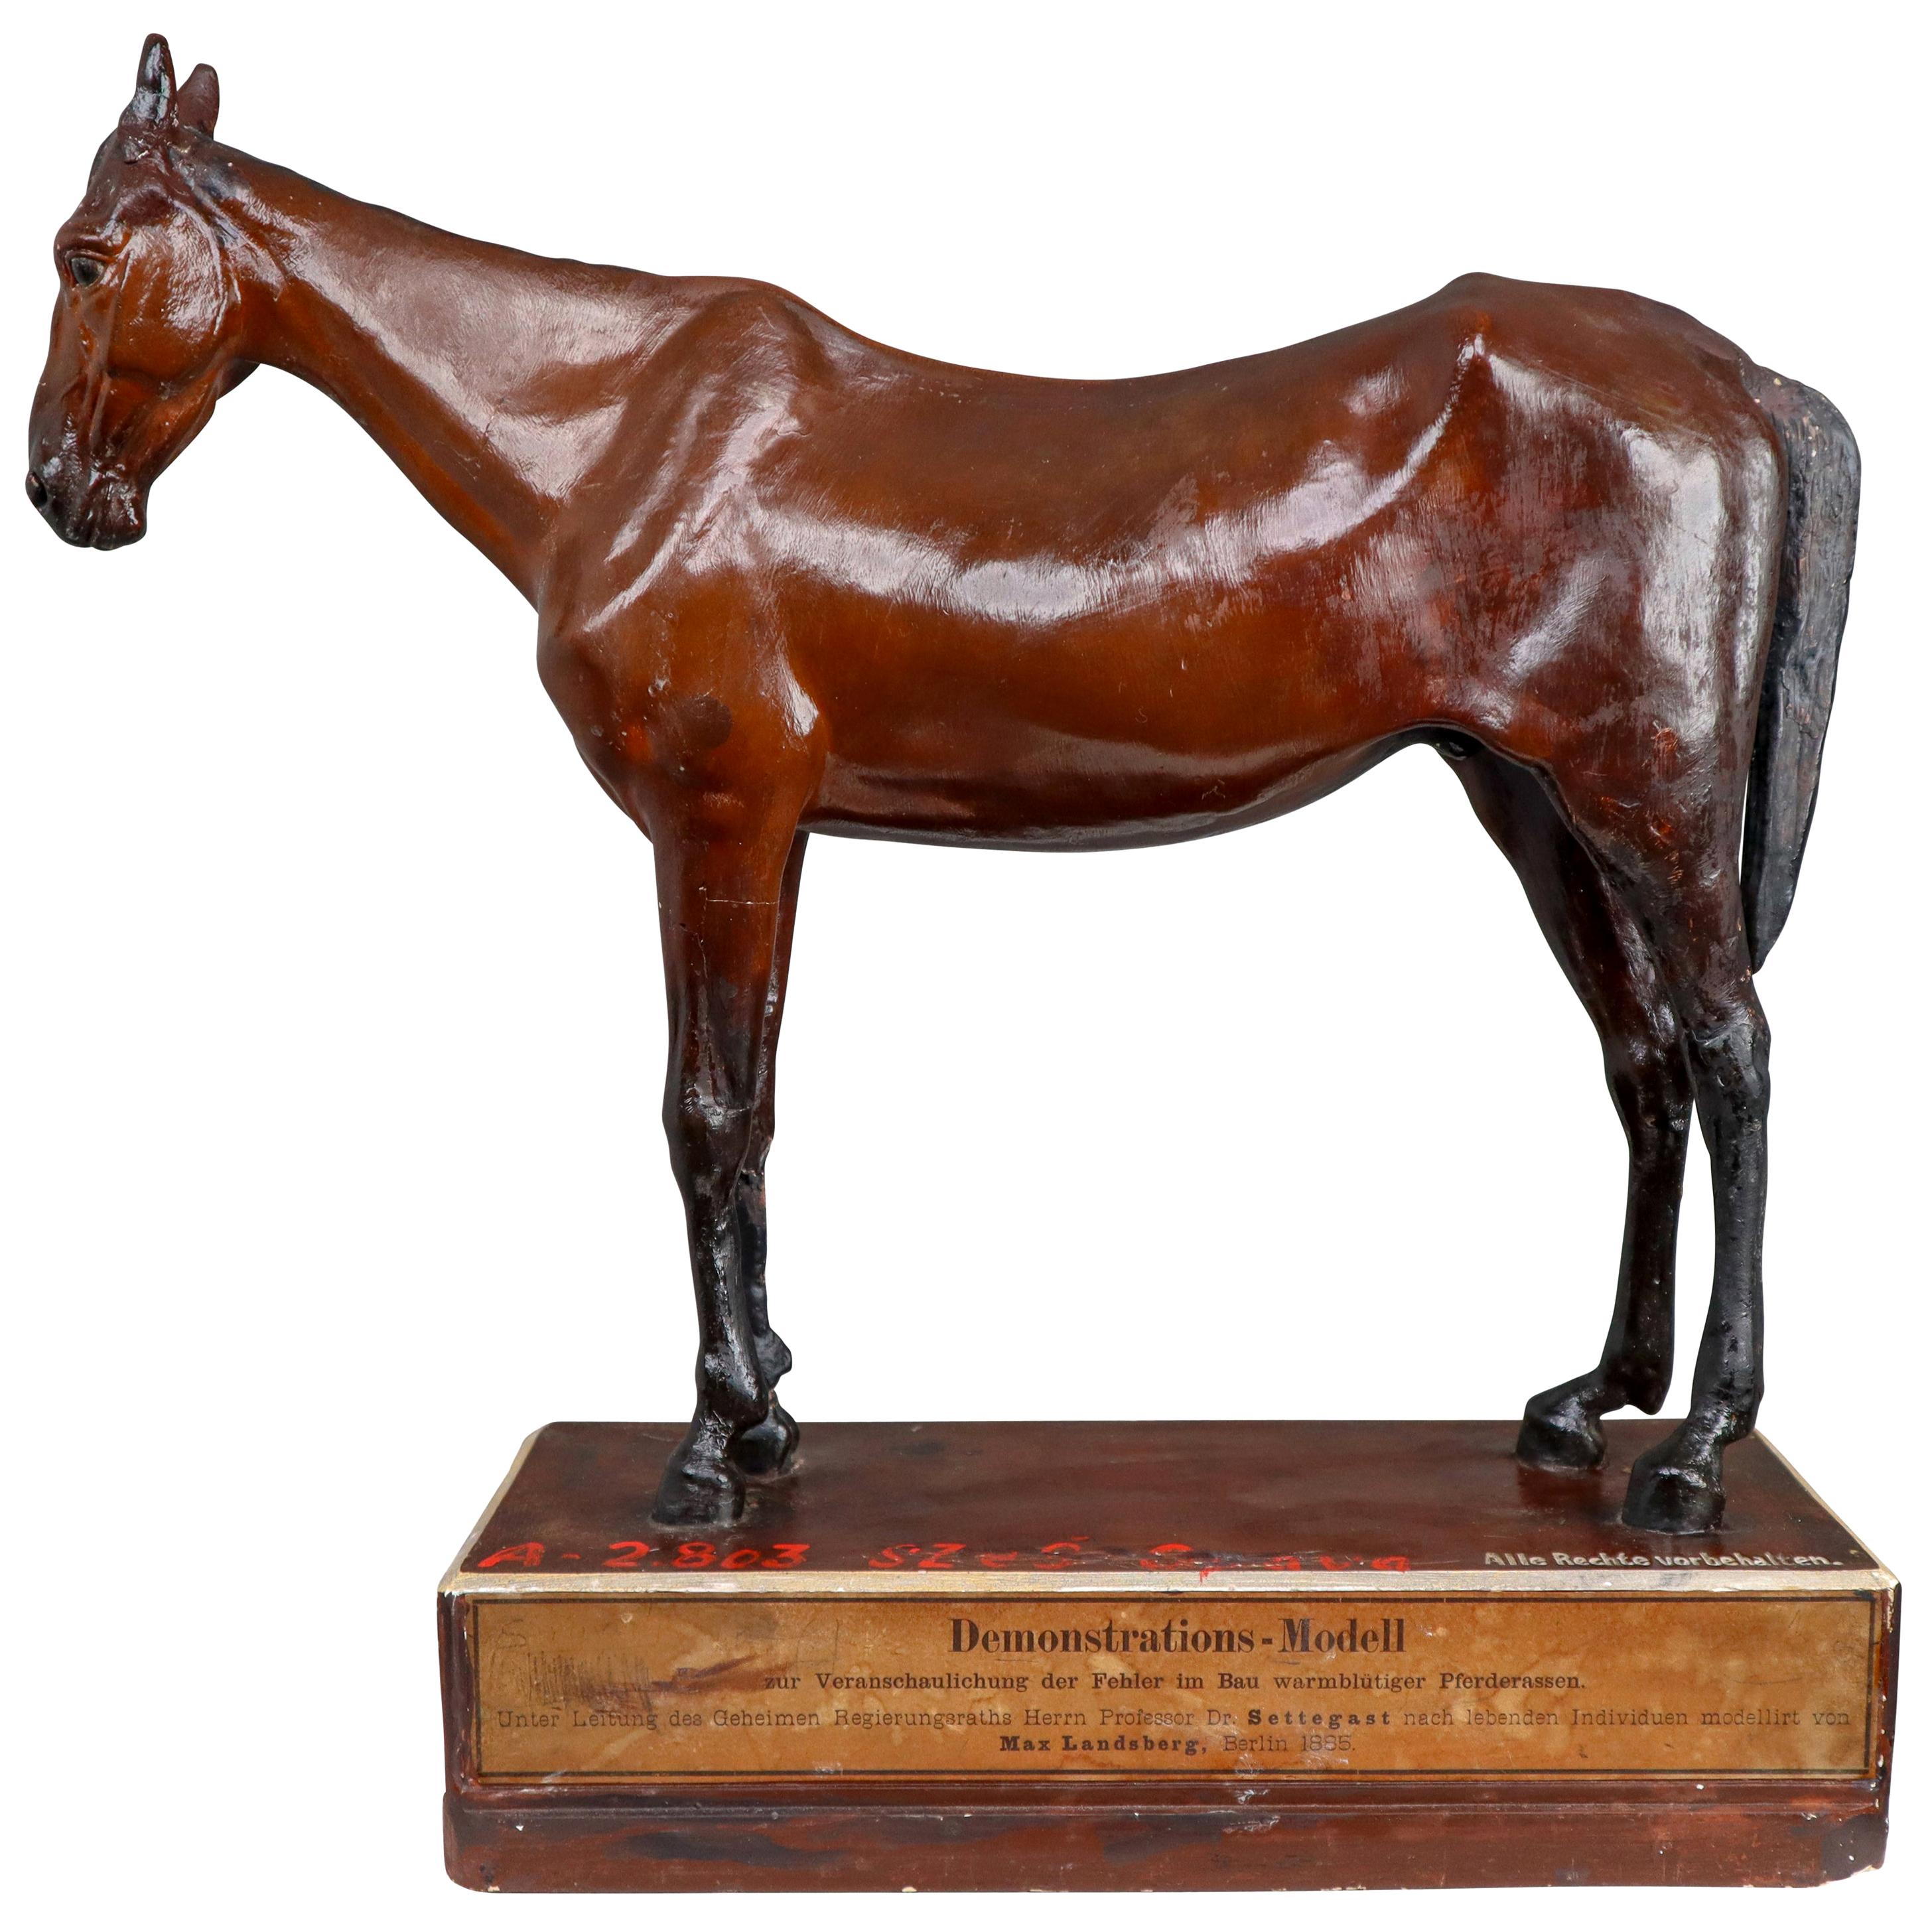 Warm-Blooded Horse Model in Painted Plaster by Max Landsberg, Berlin, 1885